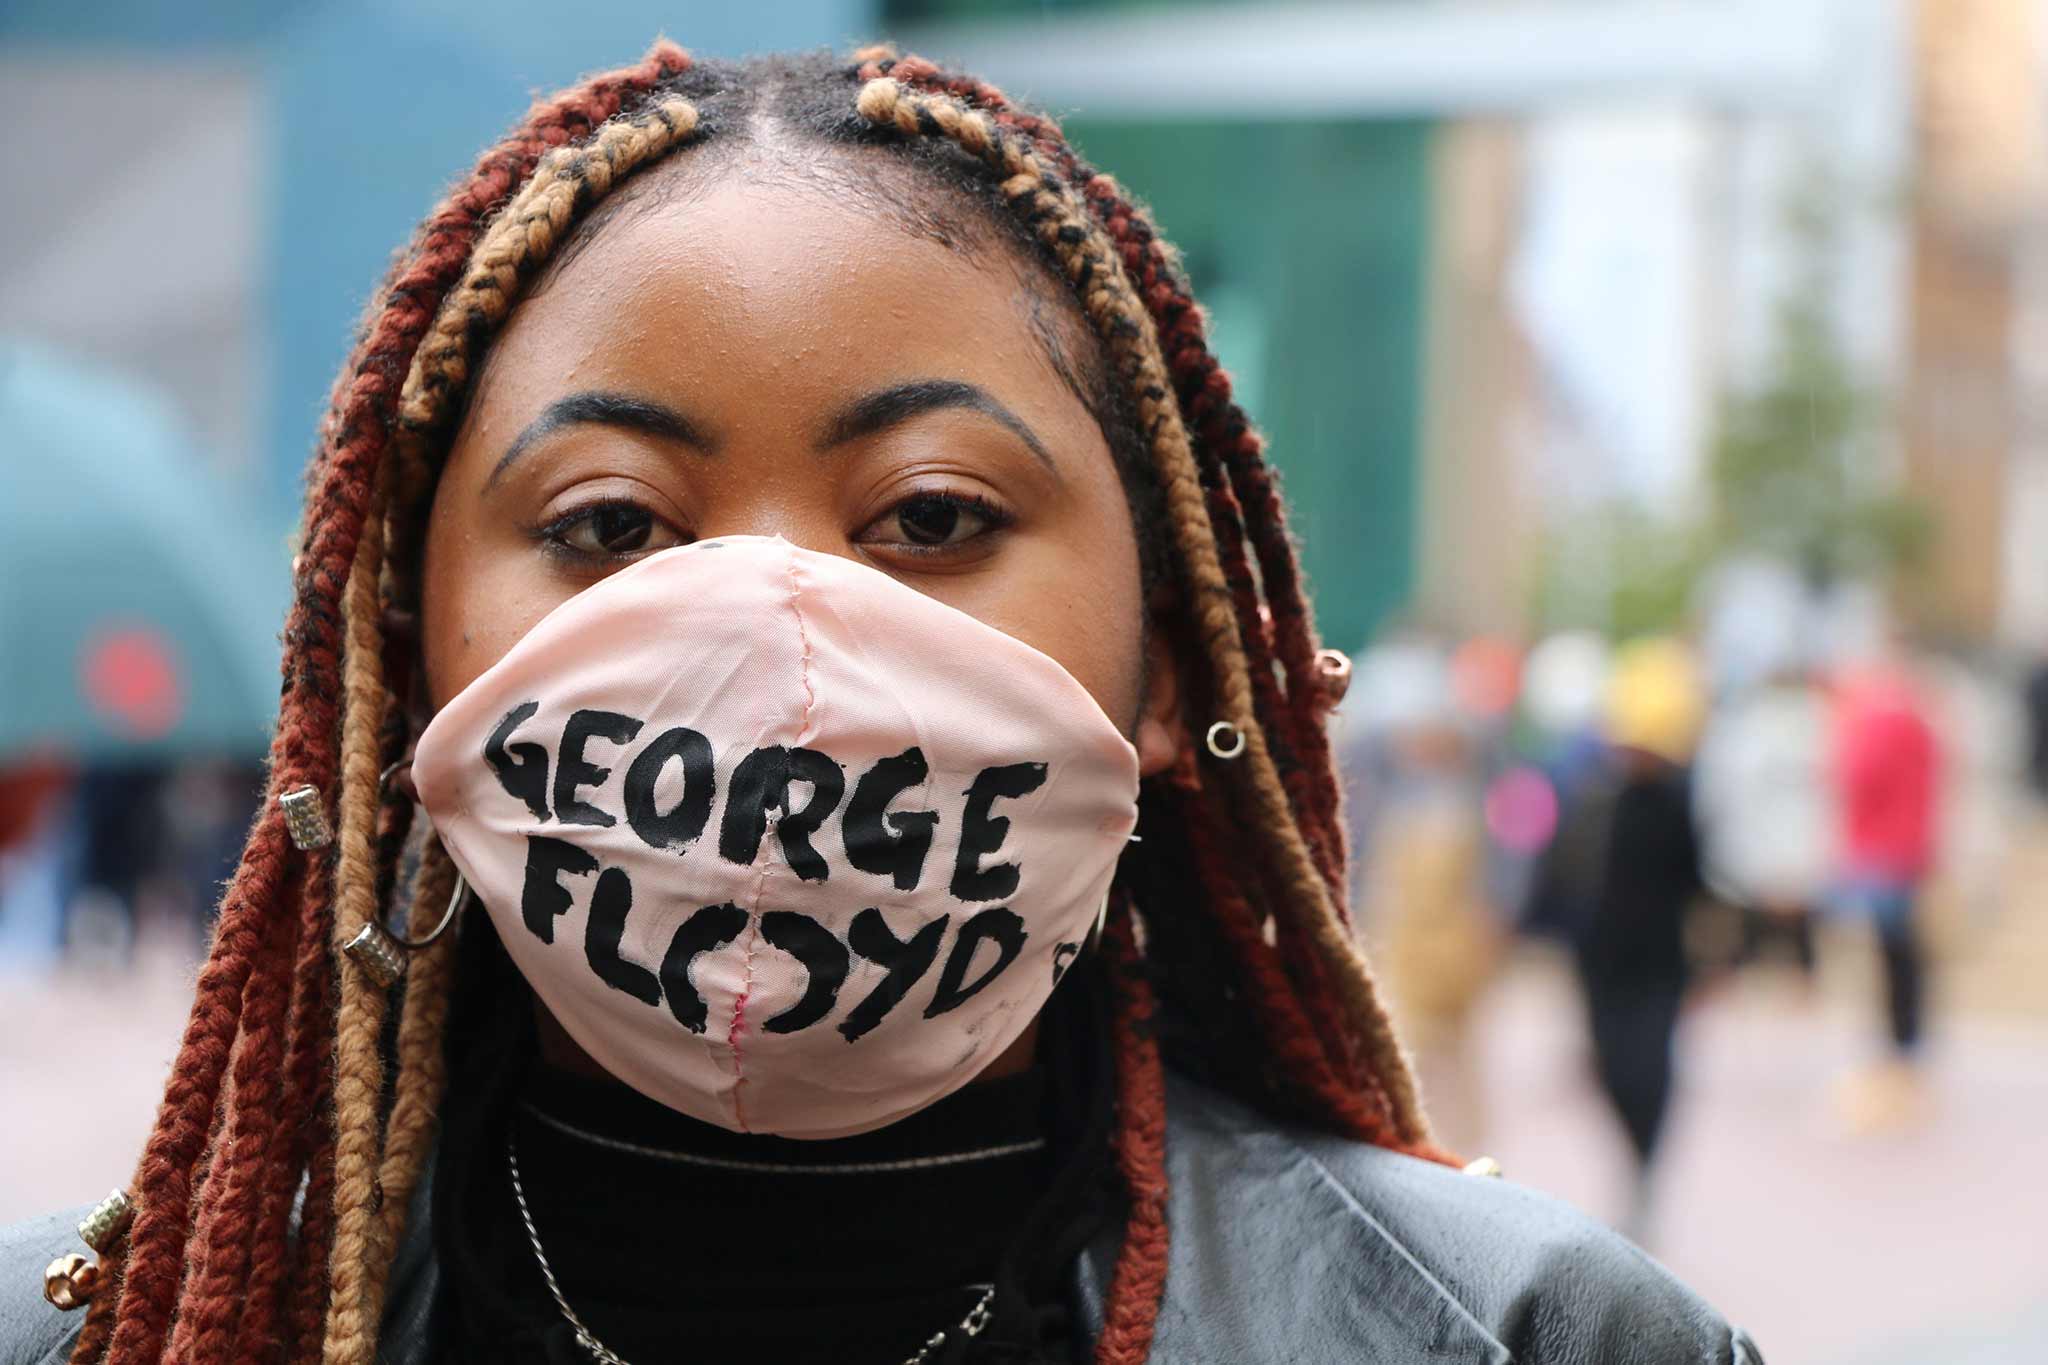 Photo of a woman looking at the camera, wearing a mask that says, "George Floyd".